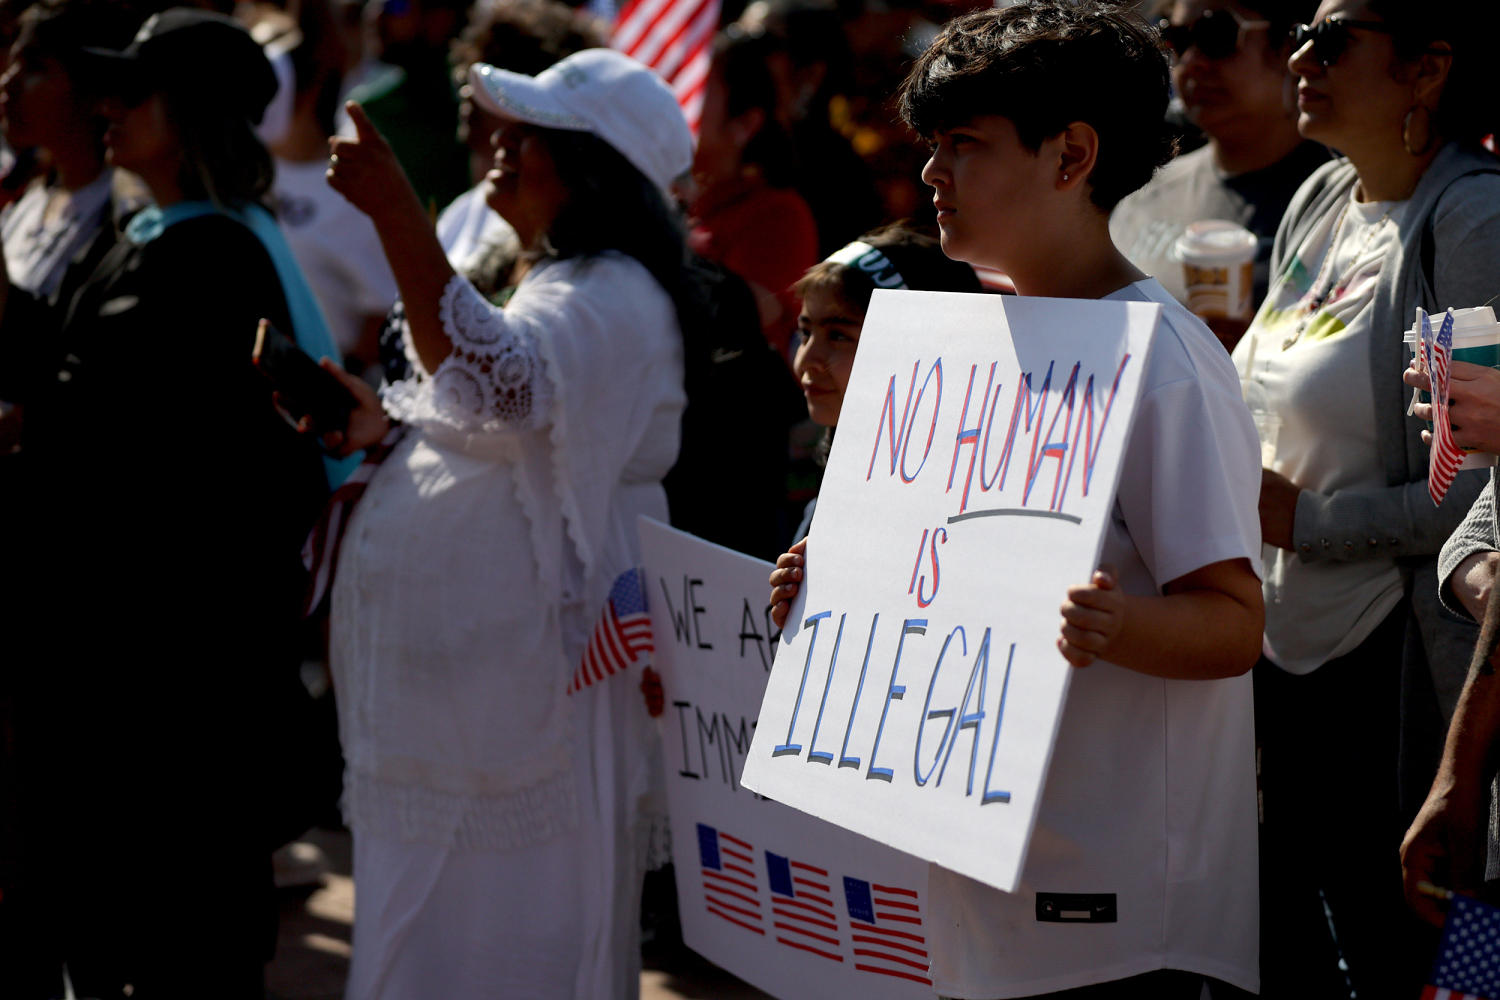 The U.S. Justice Department sues Oklahoma over a new immigration law